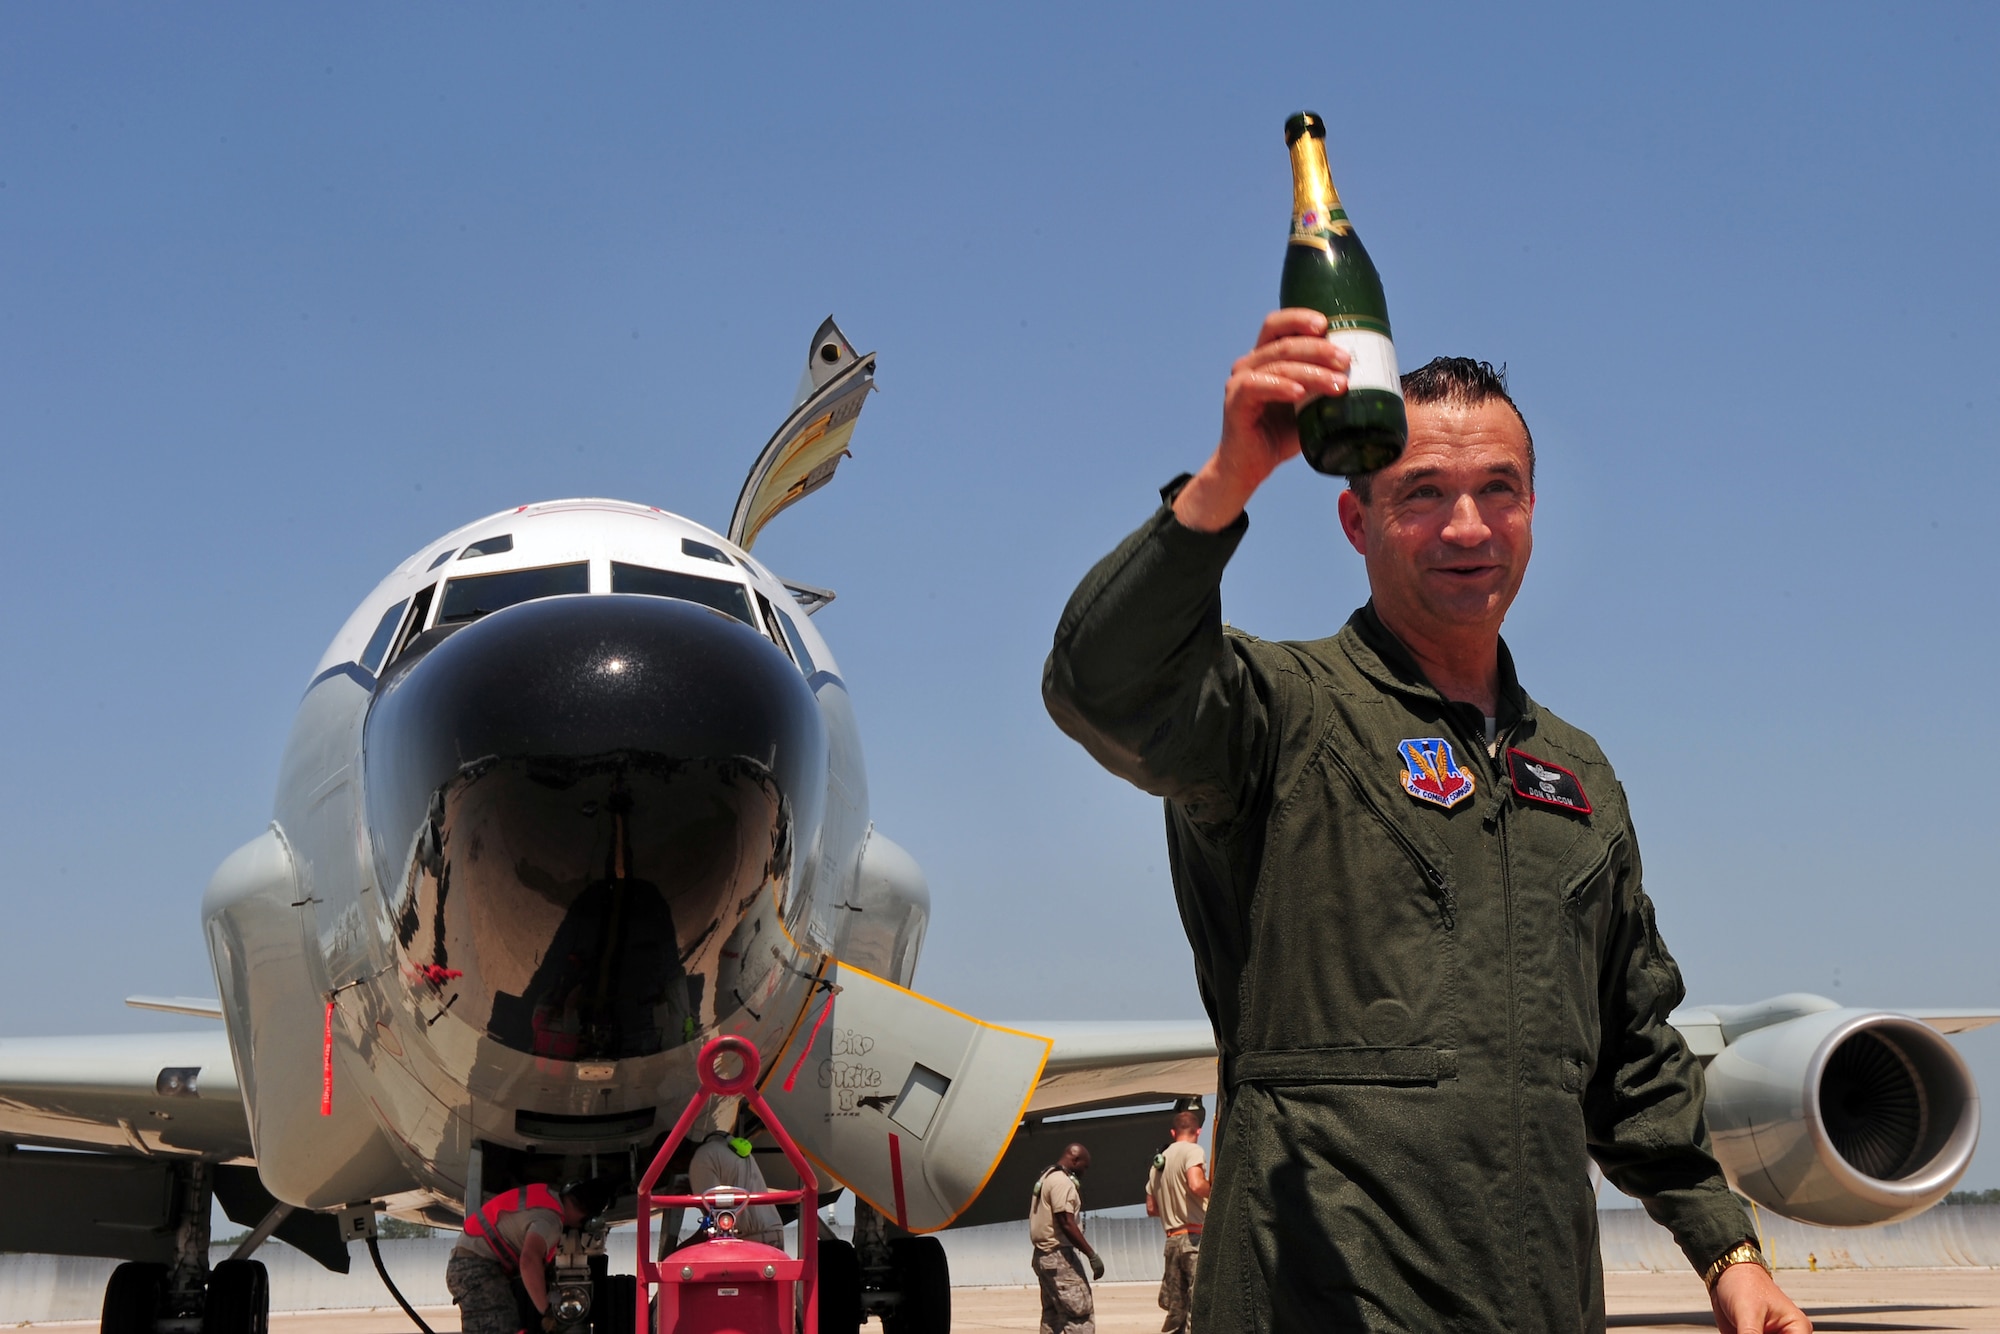 U.S. Air Force Brig. Gen. Donald Bacon, 55th Wing Commander, salutes the men and women attending his fini flight after being hosed down with a fire hose and champagne bottles from family and aircrew June 26 at Offutt Air Force Base, Neb.  Fini flights are a common military tribute to the outgoing commander of a military instillation.  (U.S. Air Force photo by Josh Plueger/Released)